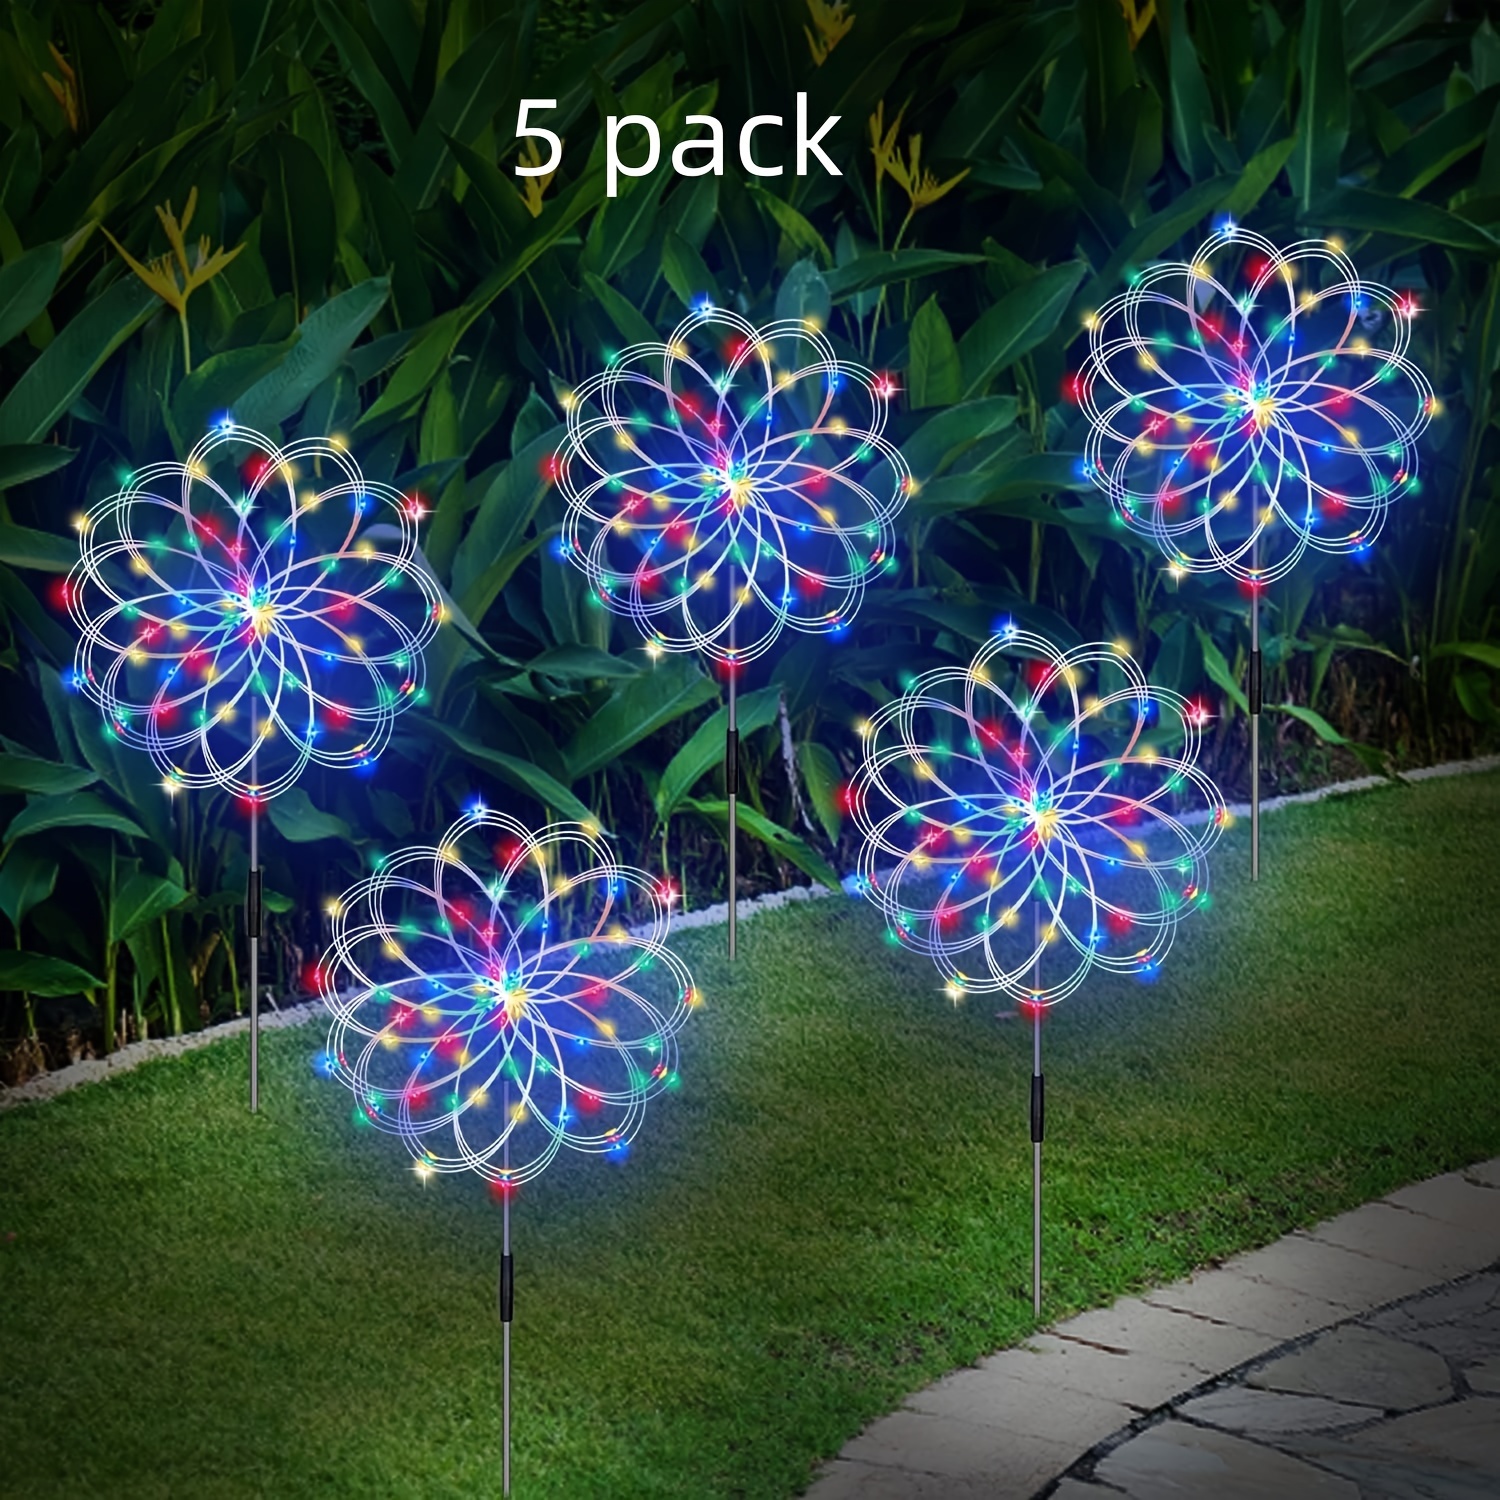 

5 Pack Outdoor , 120 Led Copper Wire Garden Fireworks Lamp With Remote, 8 Modes Decorative Sparkles Stake Landscape Light For Pathway Lawn Decor